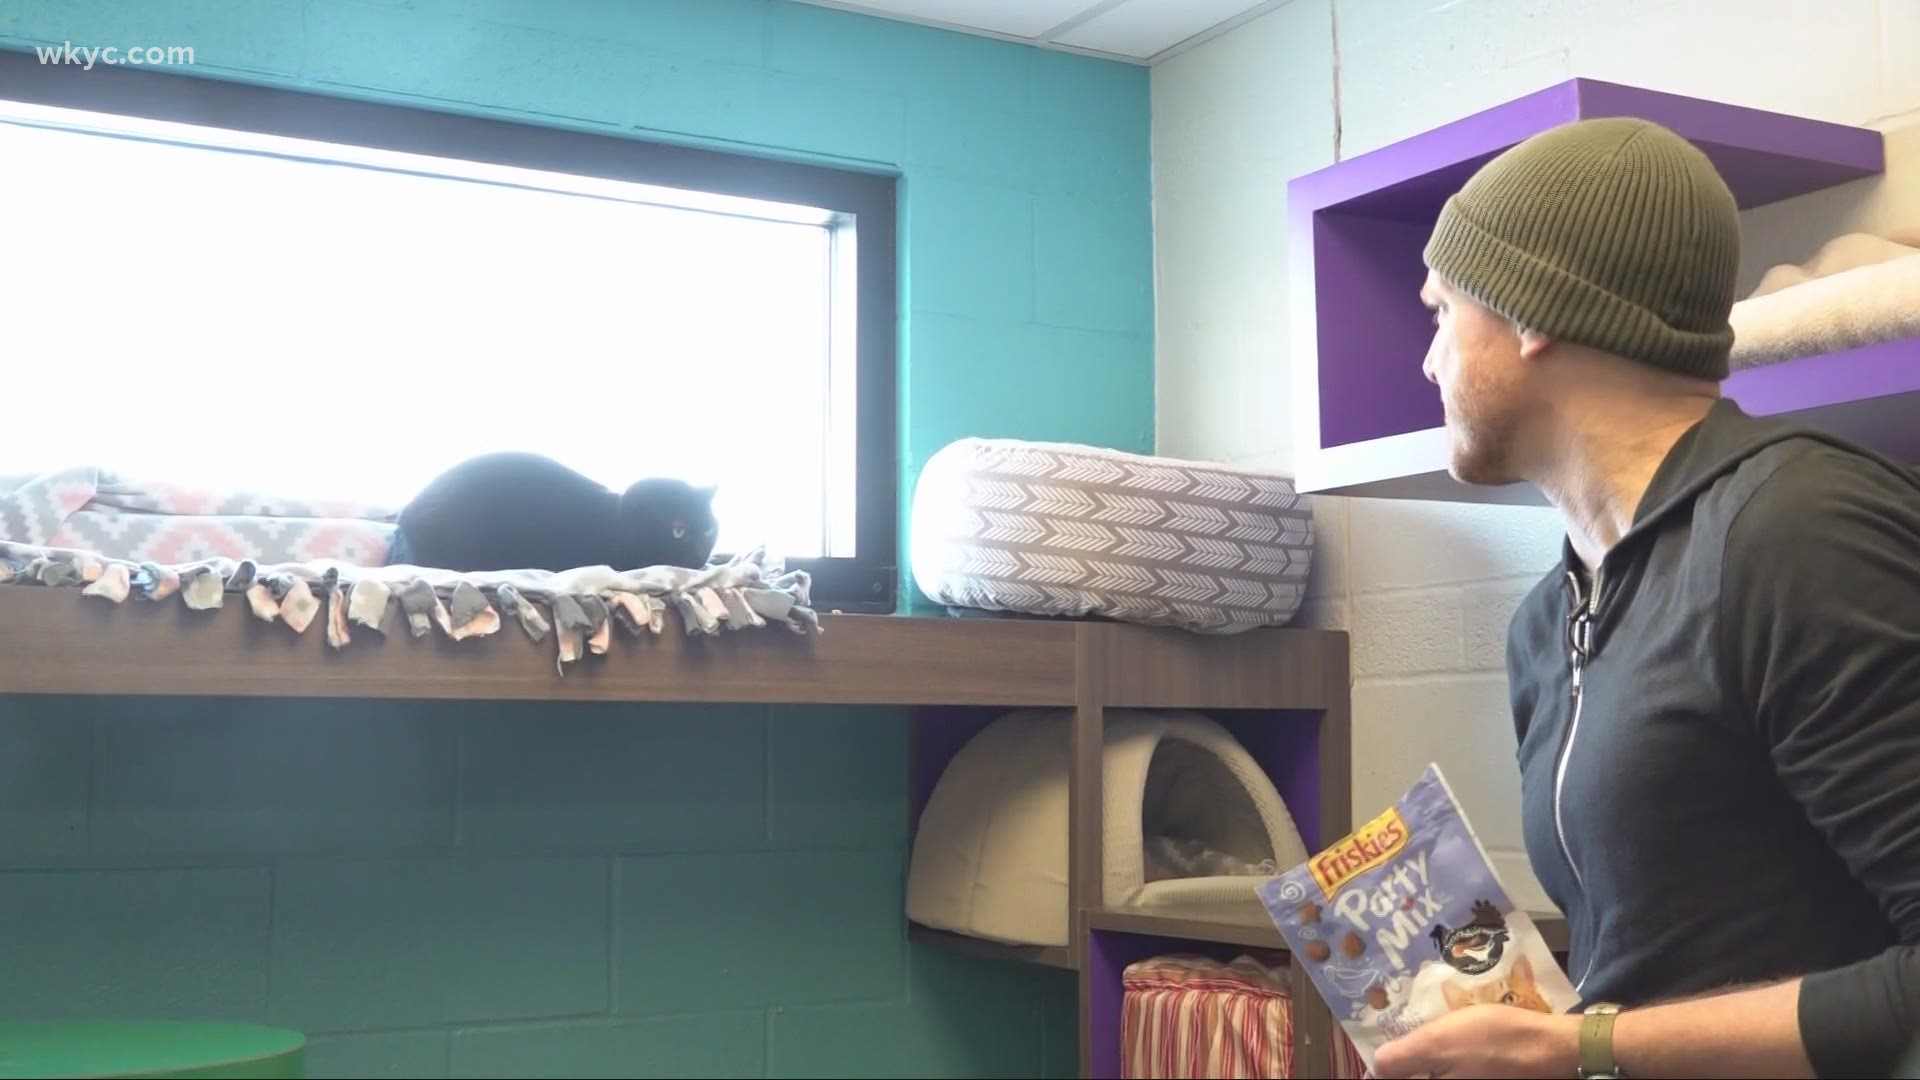 Because mean cats need homes, too! Mike journeyed to Akron's One of a Kind Pet Rescue to meet Creature, a rather grumpy cat.